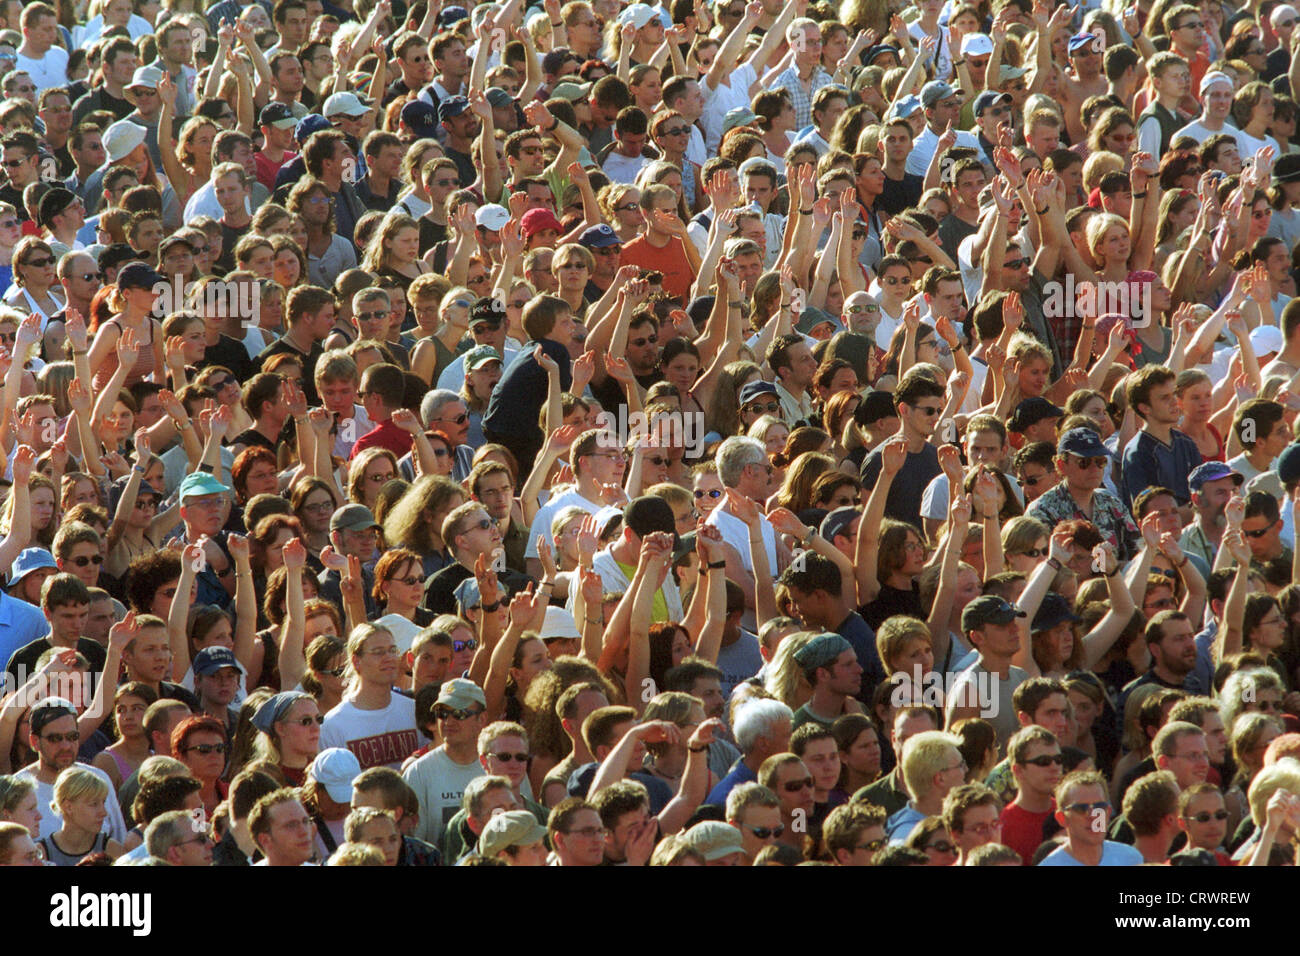 A crowd while celebrating on an open air event Stock Photo